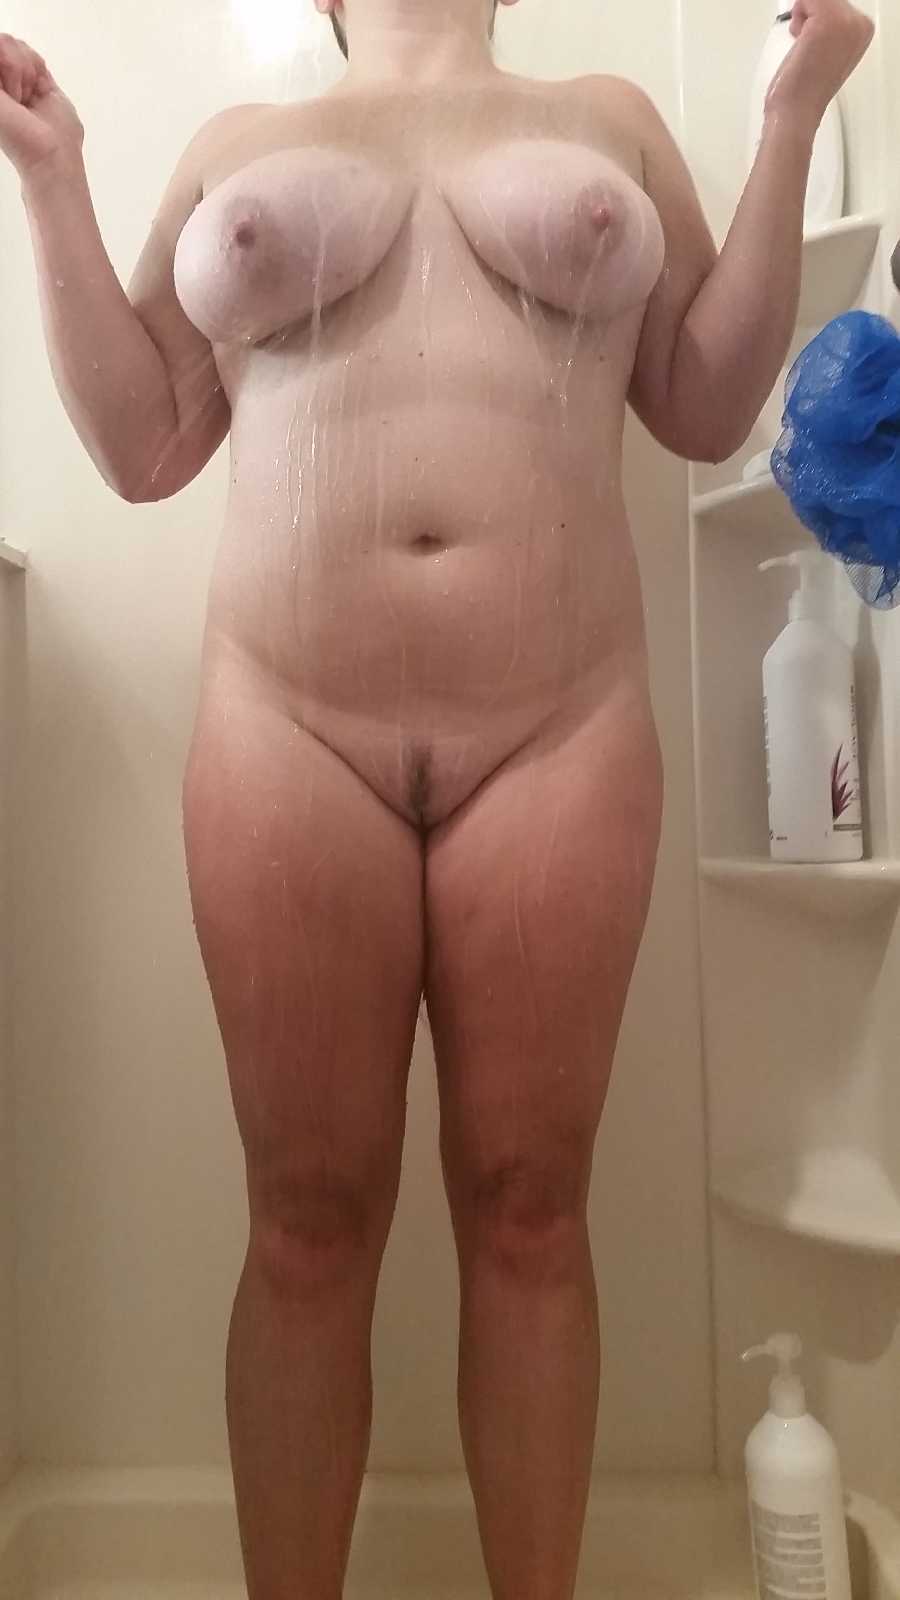 Soapy Butt in the Shower